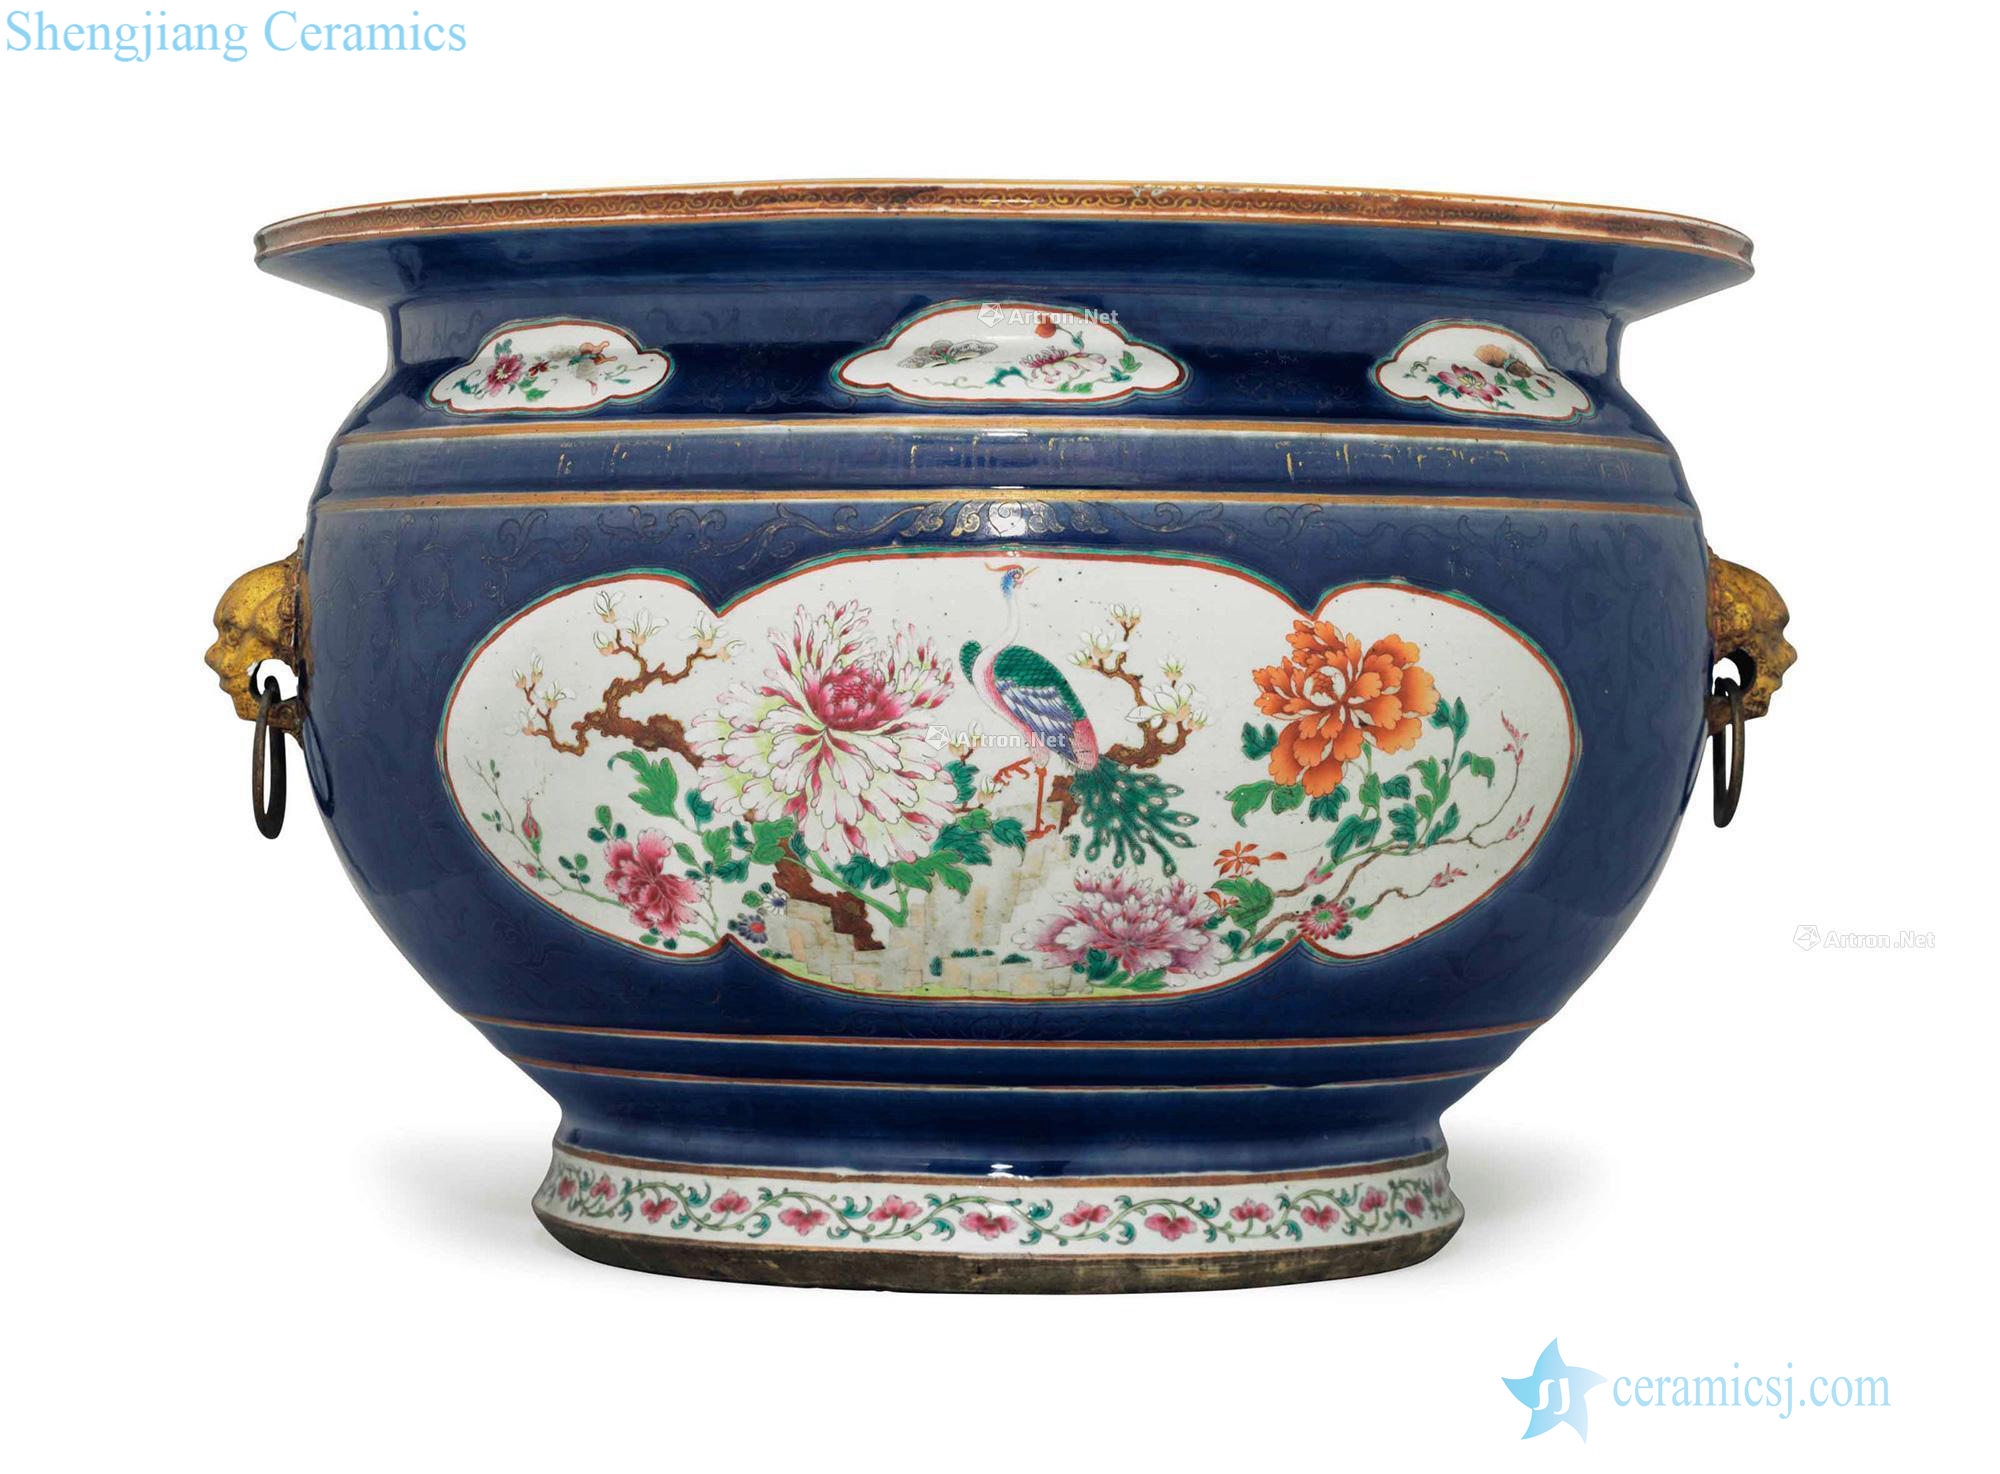 Qianlong period, the 18th century middle of A VERY LARGE BLUE - GROUND FAMILLE ROSE FISH BOWL